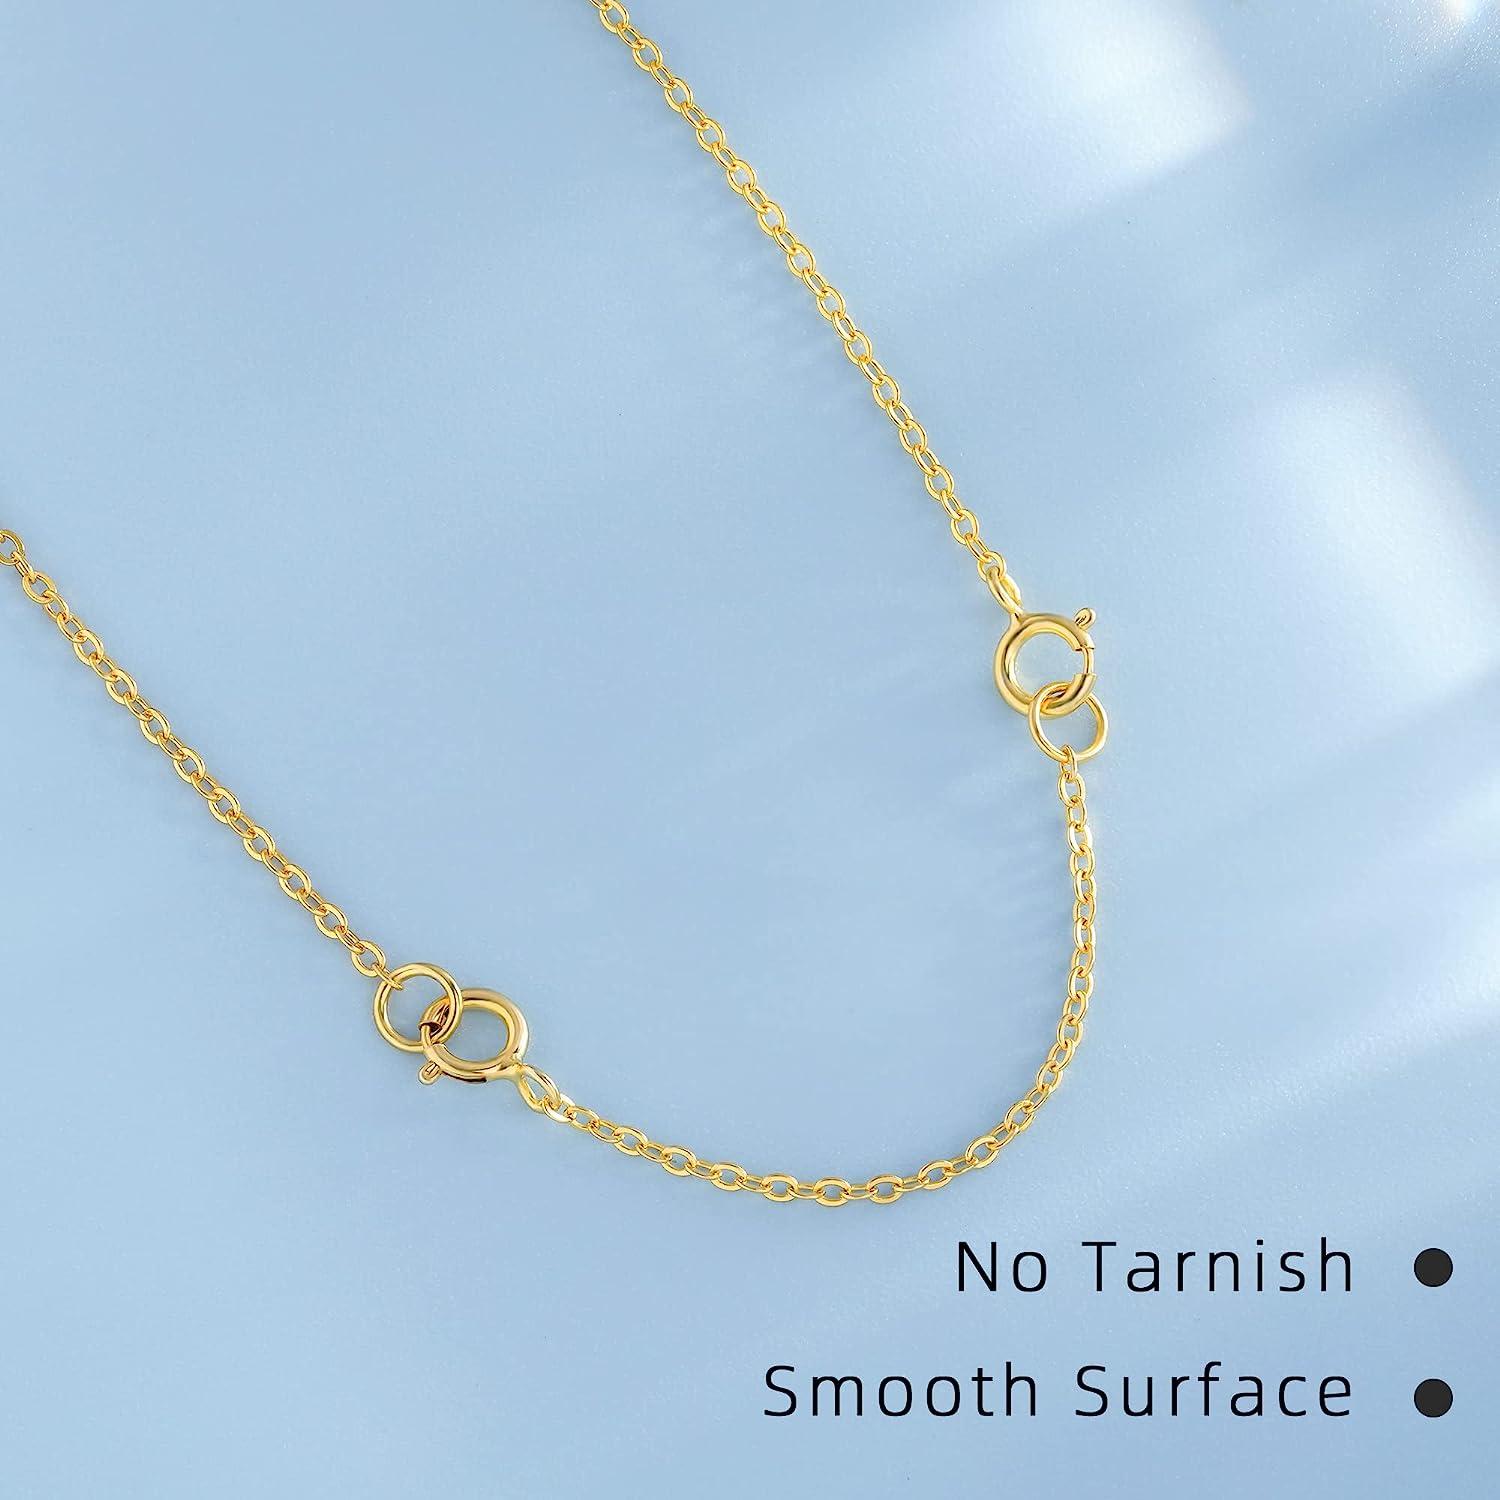  Necklace Extenders Gold Necklace Extender for Necklaces  Extender Chain S925 Sterling Silver Extender Bracelet Extender Gold Chains  Extenders for Women Necklace Anklet Extenders 1 inch 2 inch 3 inch :  Clothing